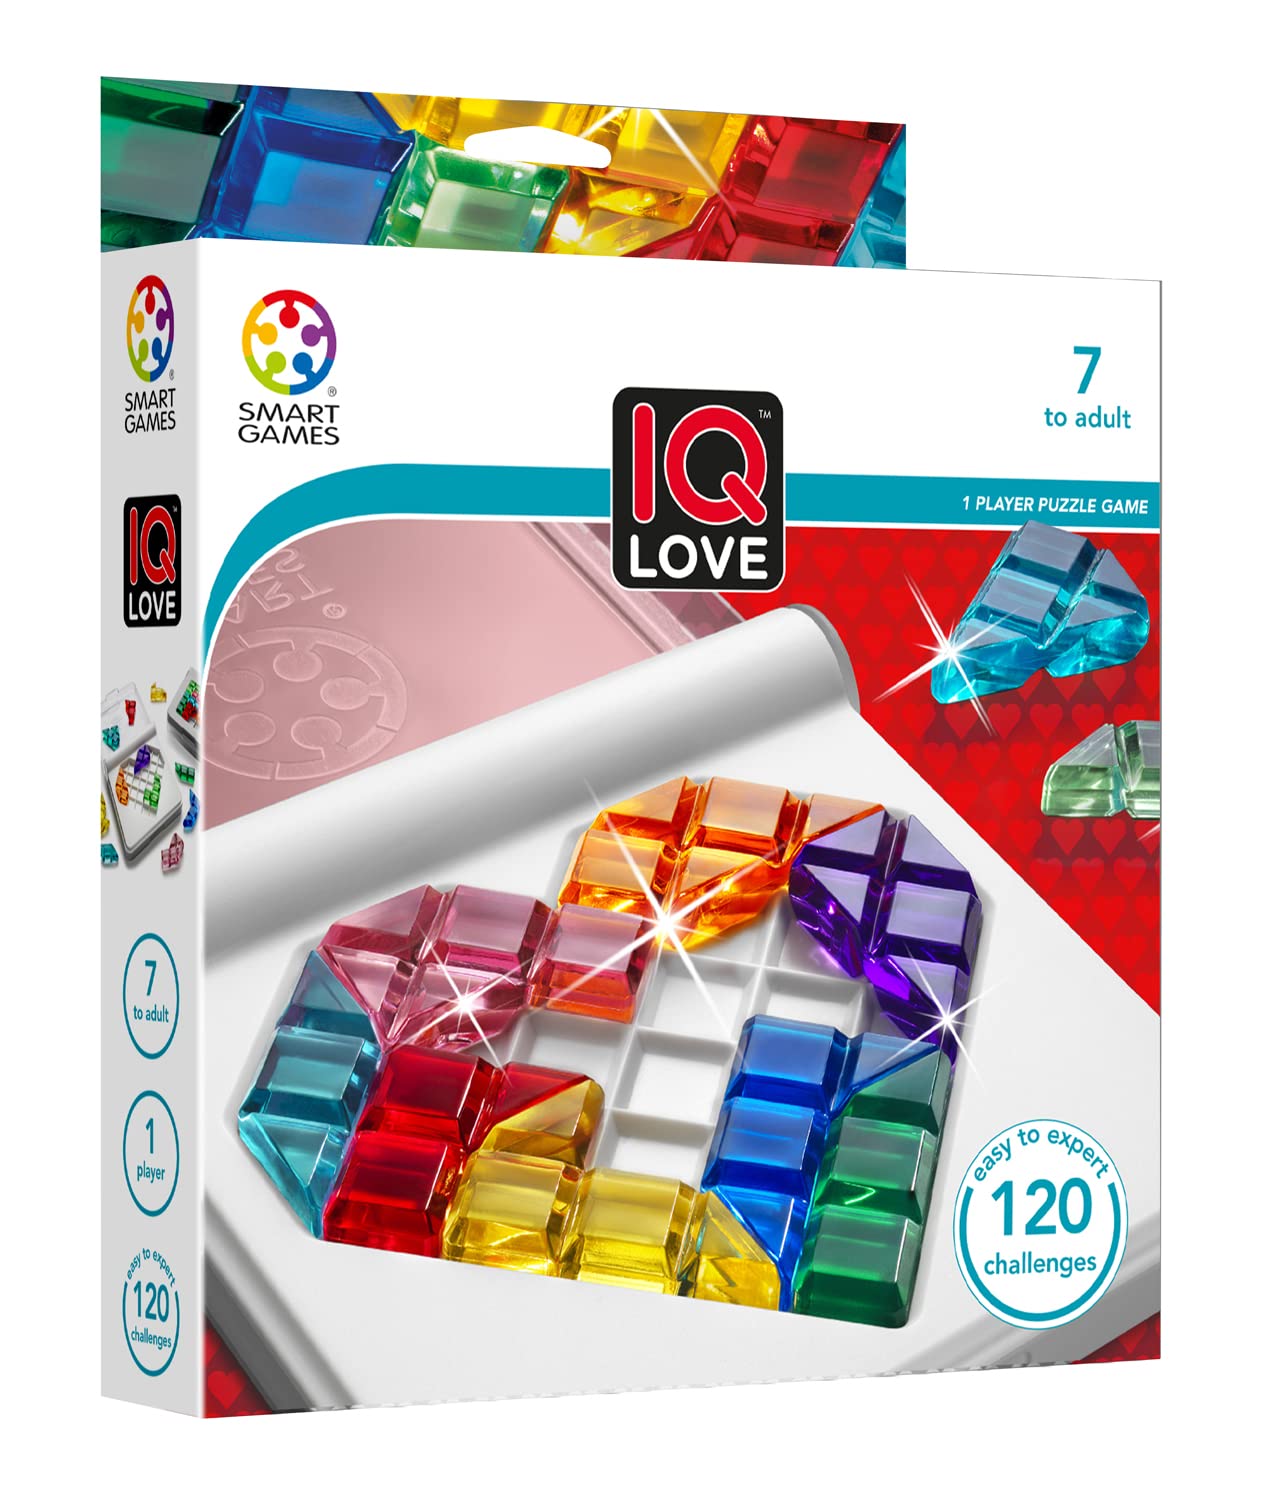 SmartGames IQ Love Travel Puzzle Game with 120 Challenges for Ages 7 - Adult